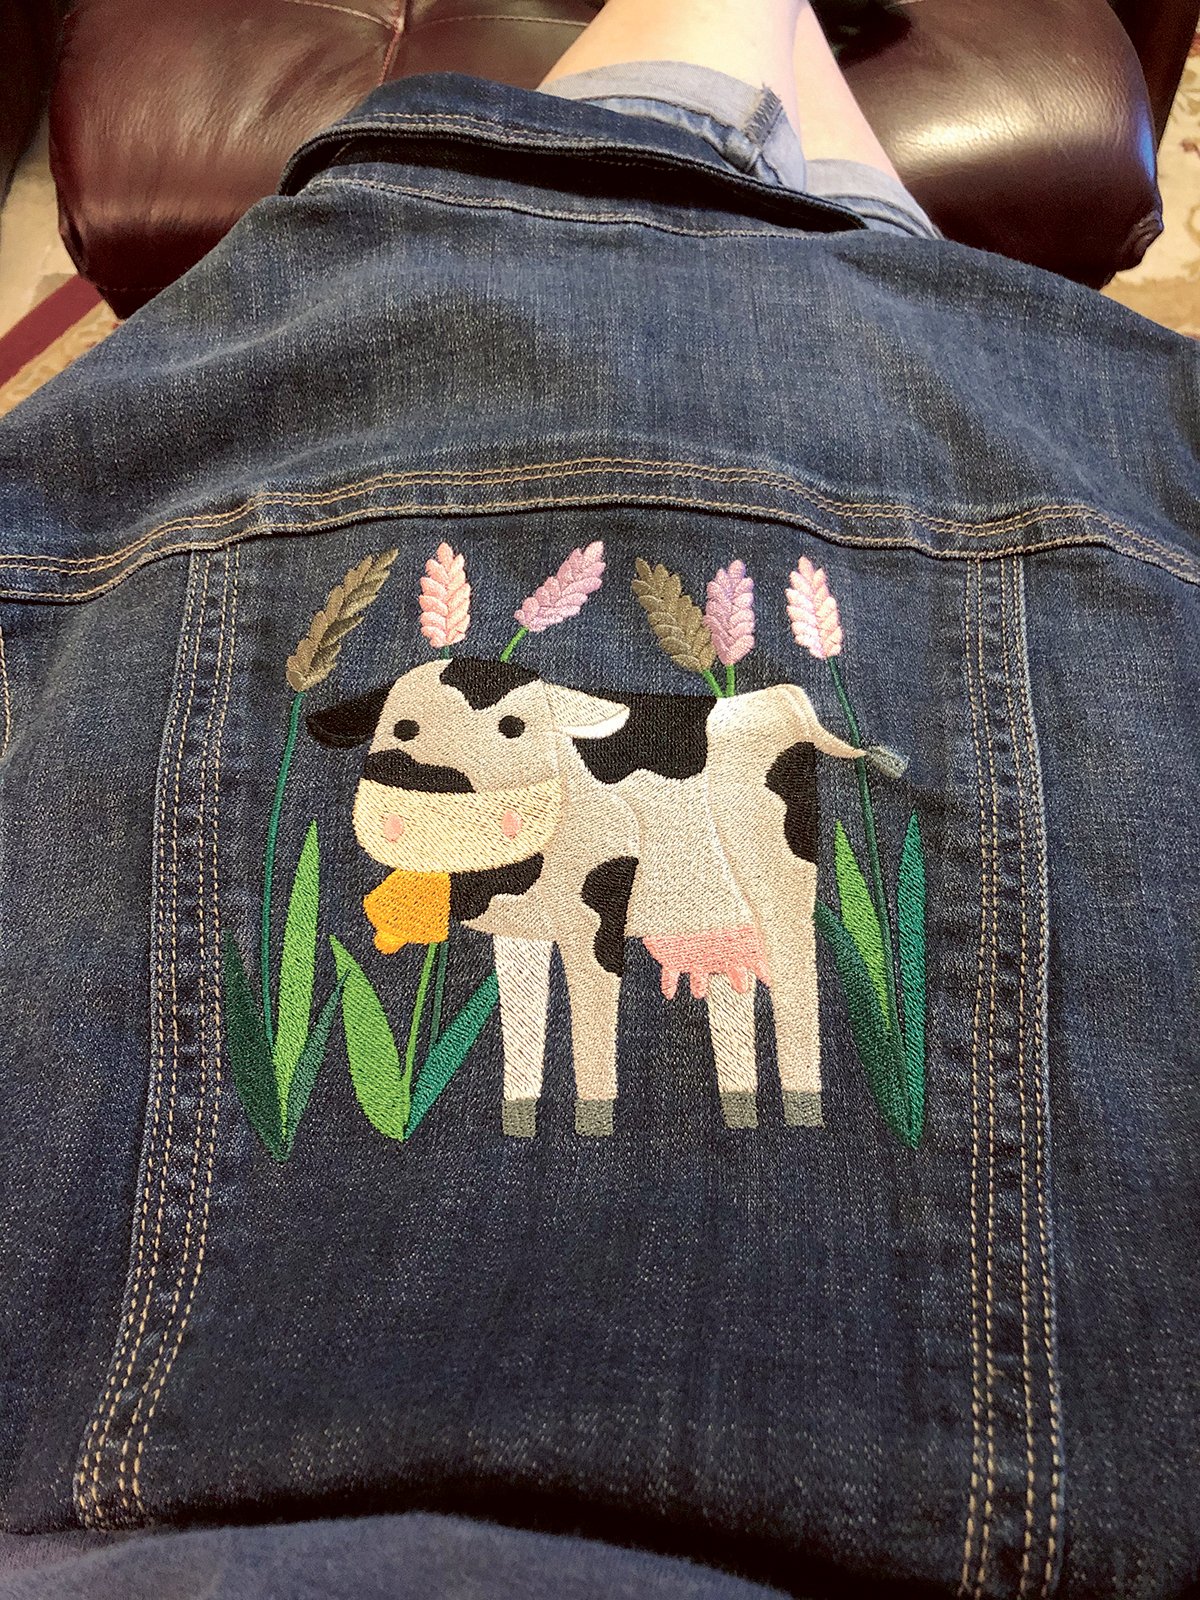 Sheri Geyer has turned a family tradition of sewing — and now embroidery — into a new job. (Courtesy photo)